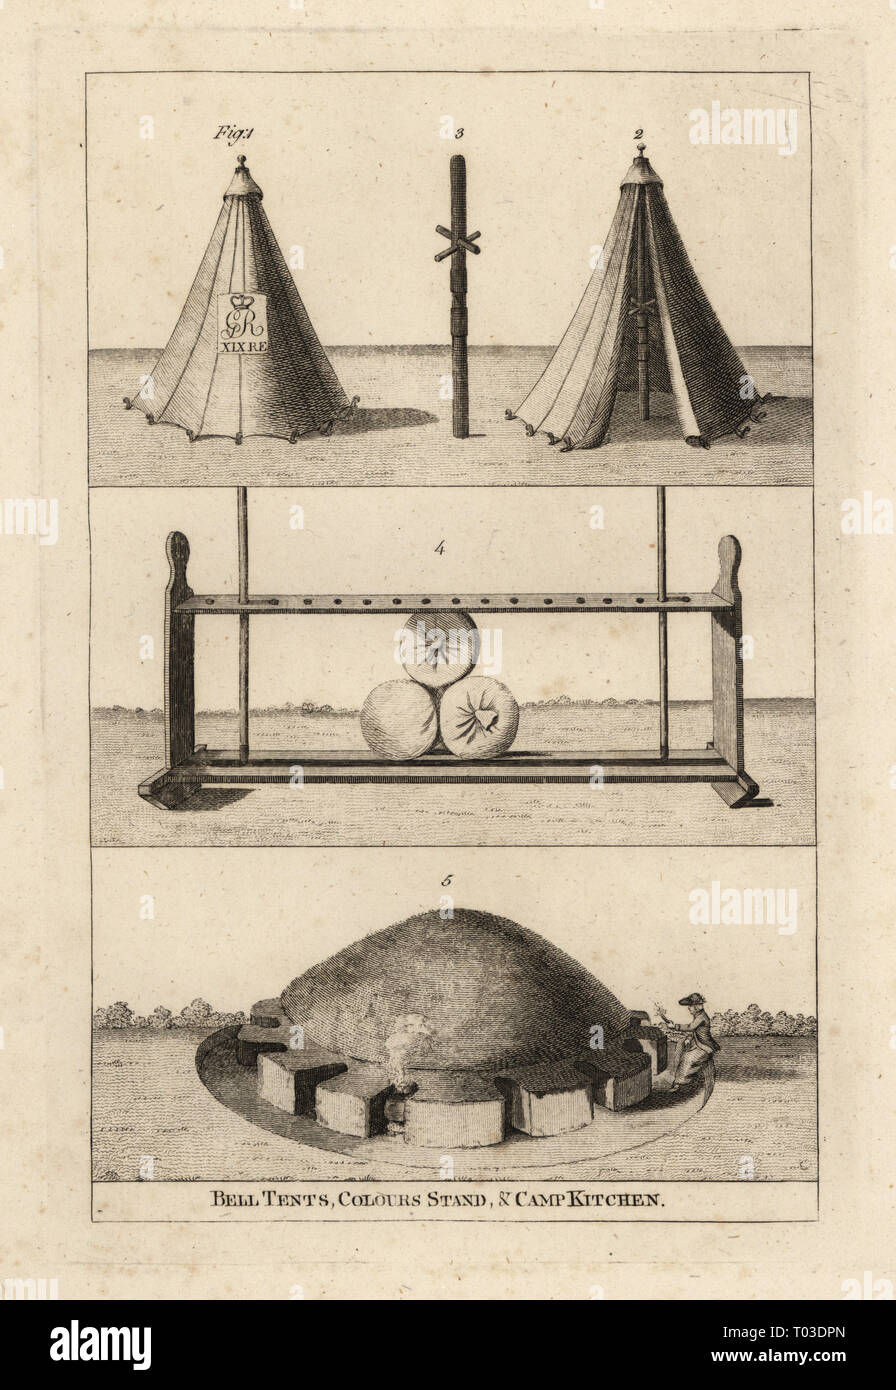 18th century military tents: called bell-tents 1,2, pole to support arms 3, stand for drums, colours and officers’ espontons 4, and camp-kitchen with a woman cooking 5.Copperplate engraving from Francis Grose's Military Antiquities respecting a History of the English Army, Stockdale, London, 1812. Stock Photo